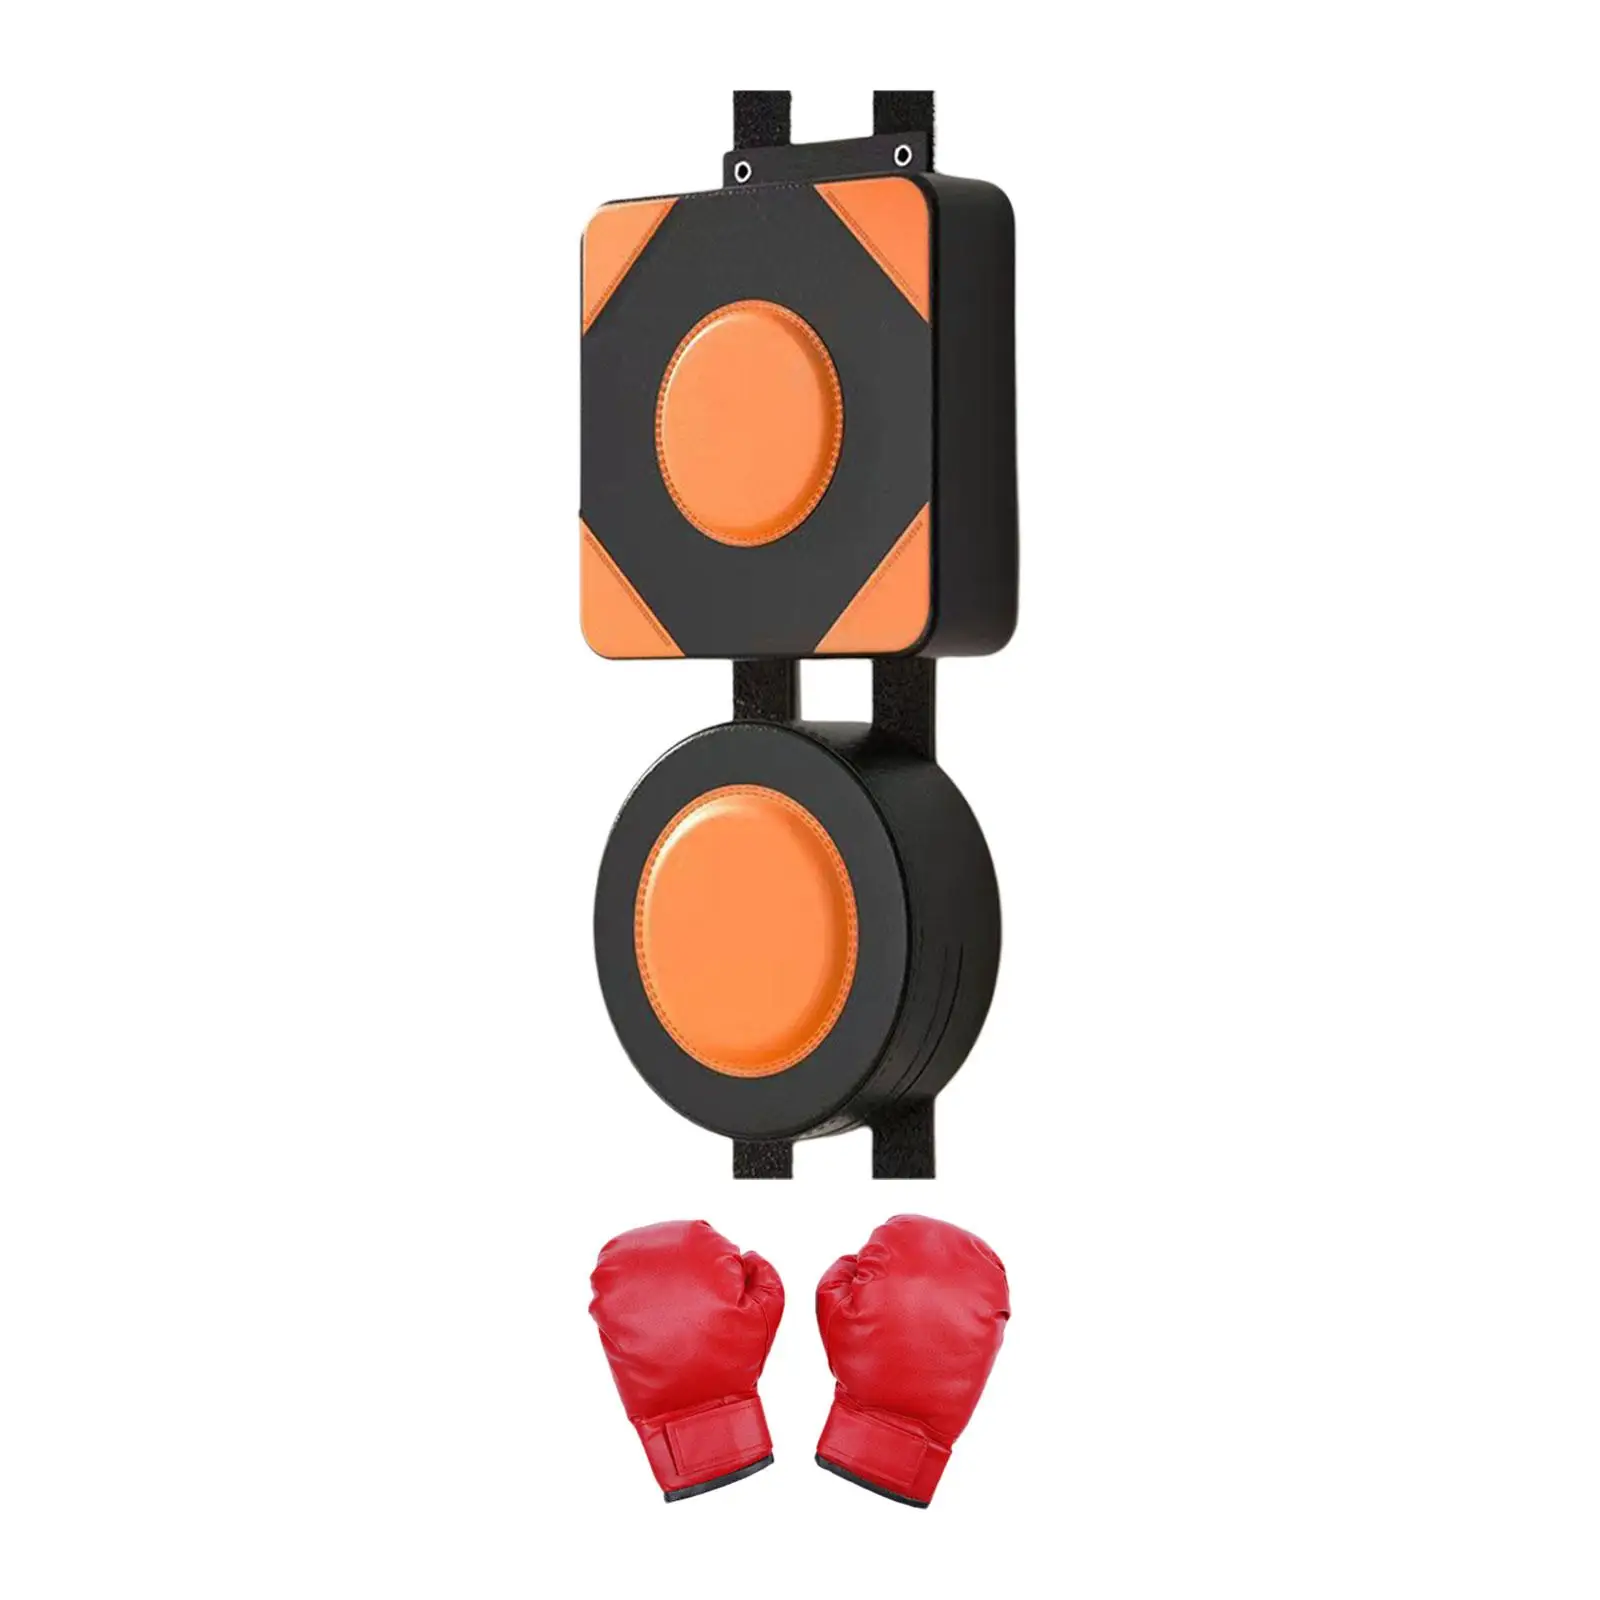 Boxing Wall Mounted Pad Practice for Karate Workout Martial Arts Gym Sports